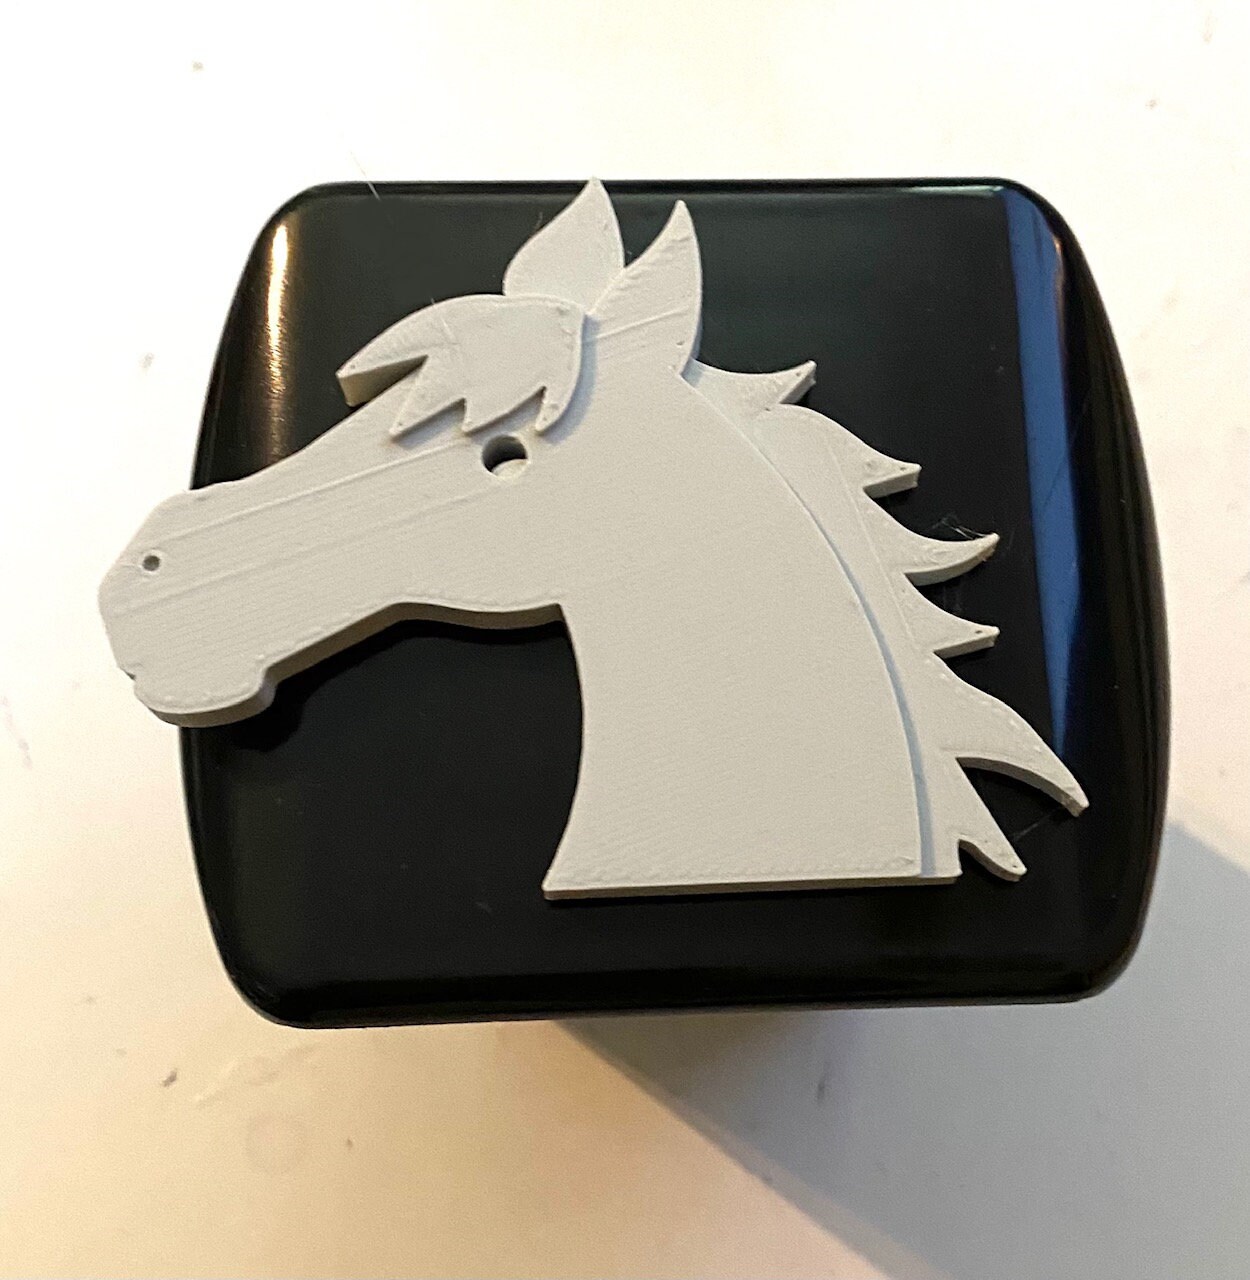 I Love Horses Unicorn Horse Head in 3d 2 inch Trailer Hitch Cover Black with Brown